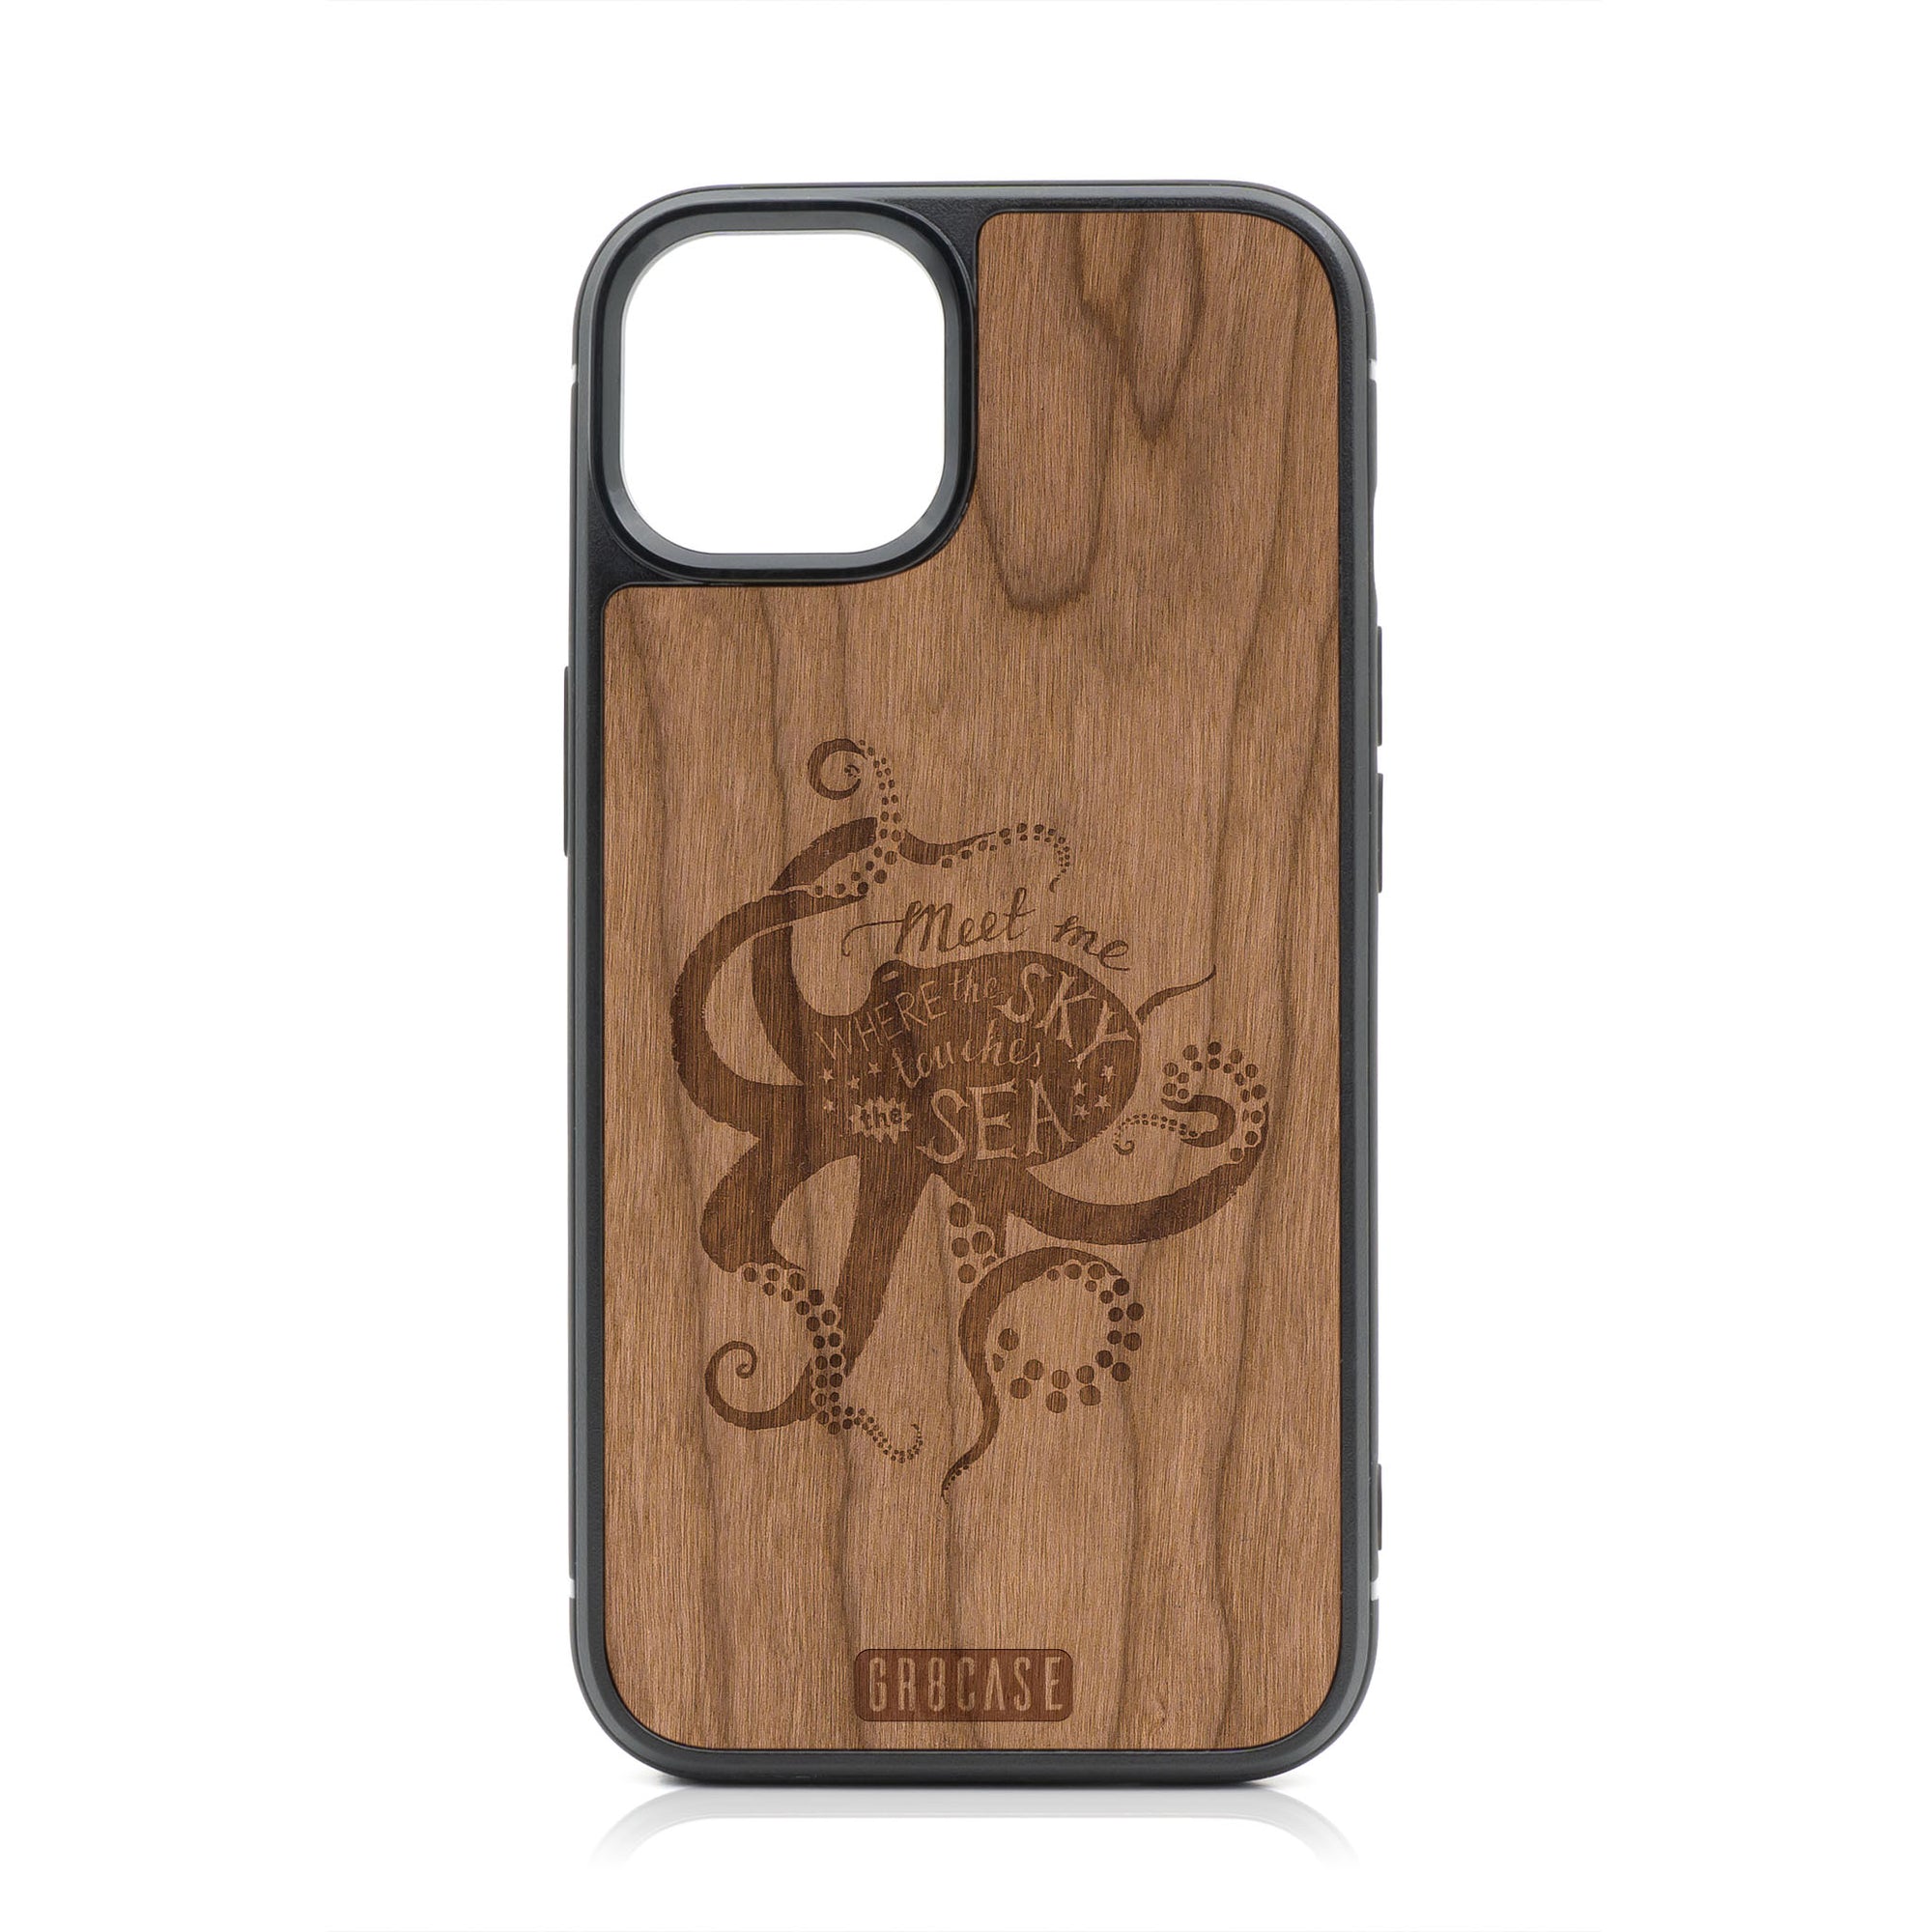 Meet Me Where The Sky Touches The Sea (Octopus) Design Wood Case For iPhone 13